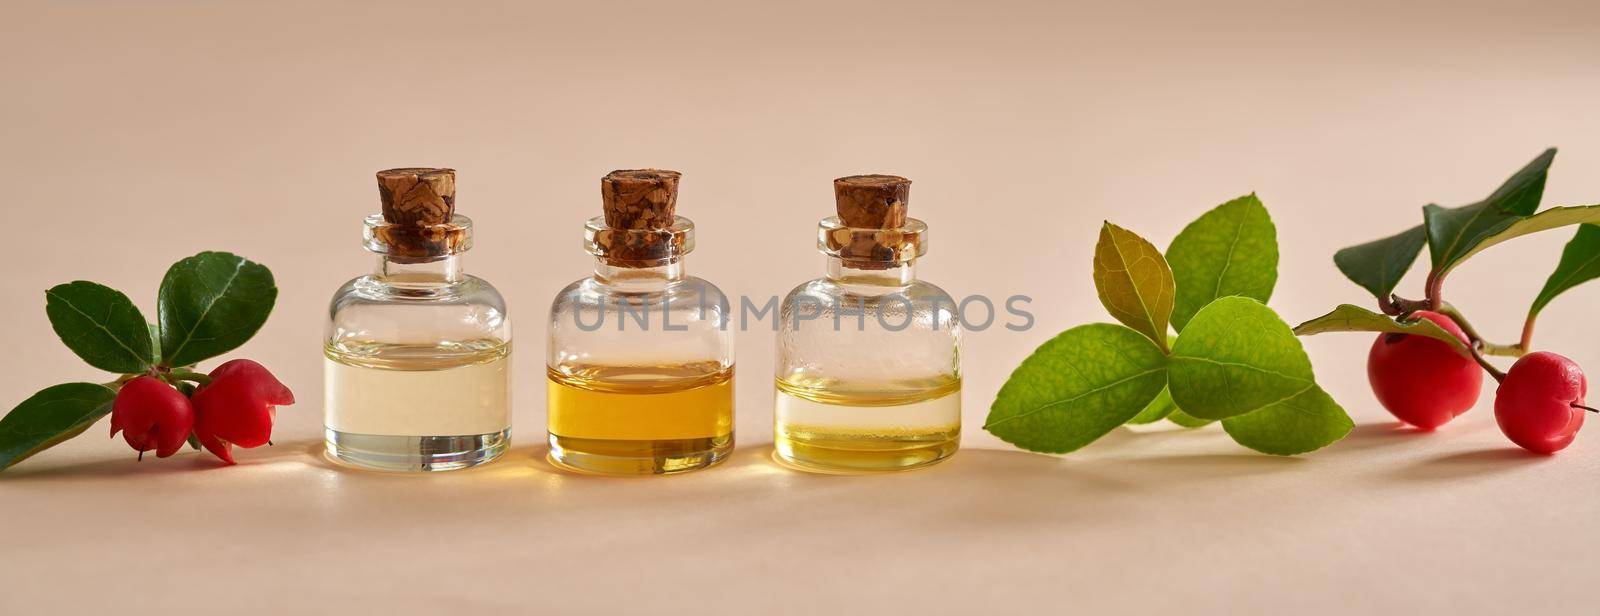 Panoramic banner of essential oil bottles with fresh wintergreen or Gaultheria procumbens plant on pastel orange background